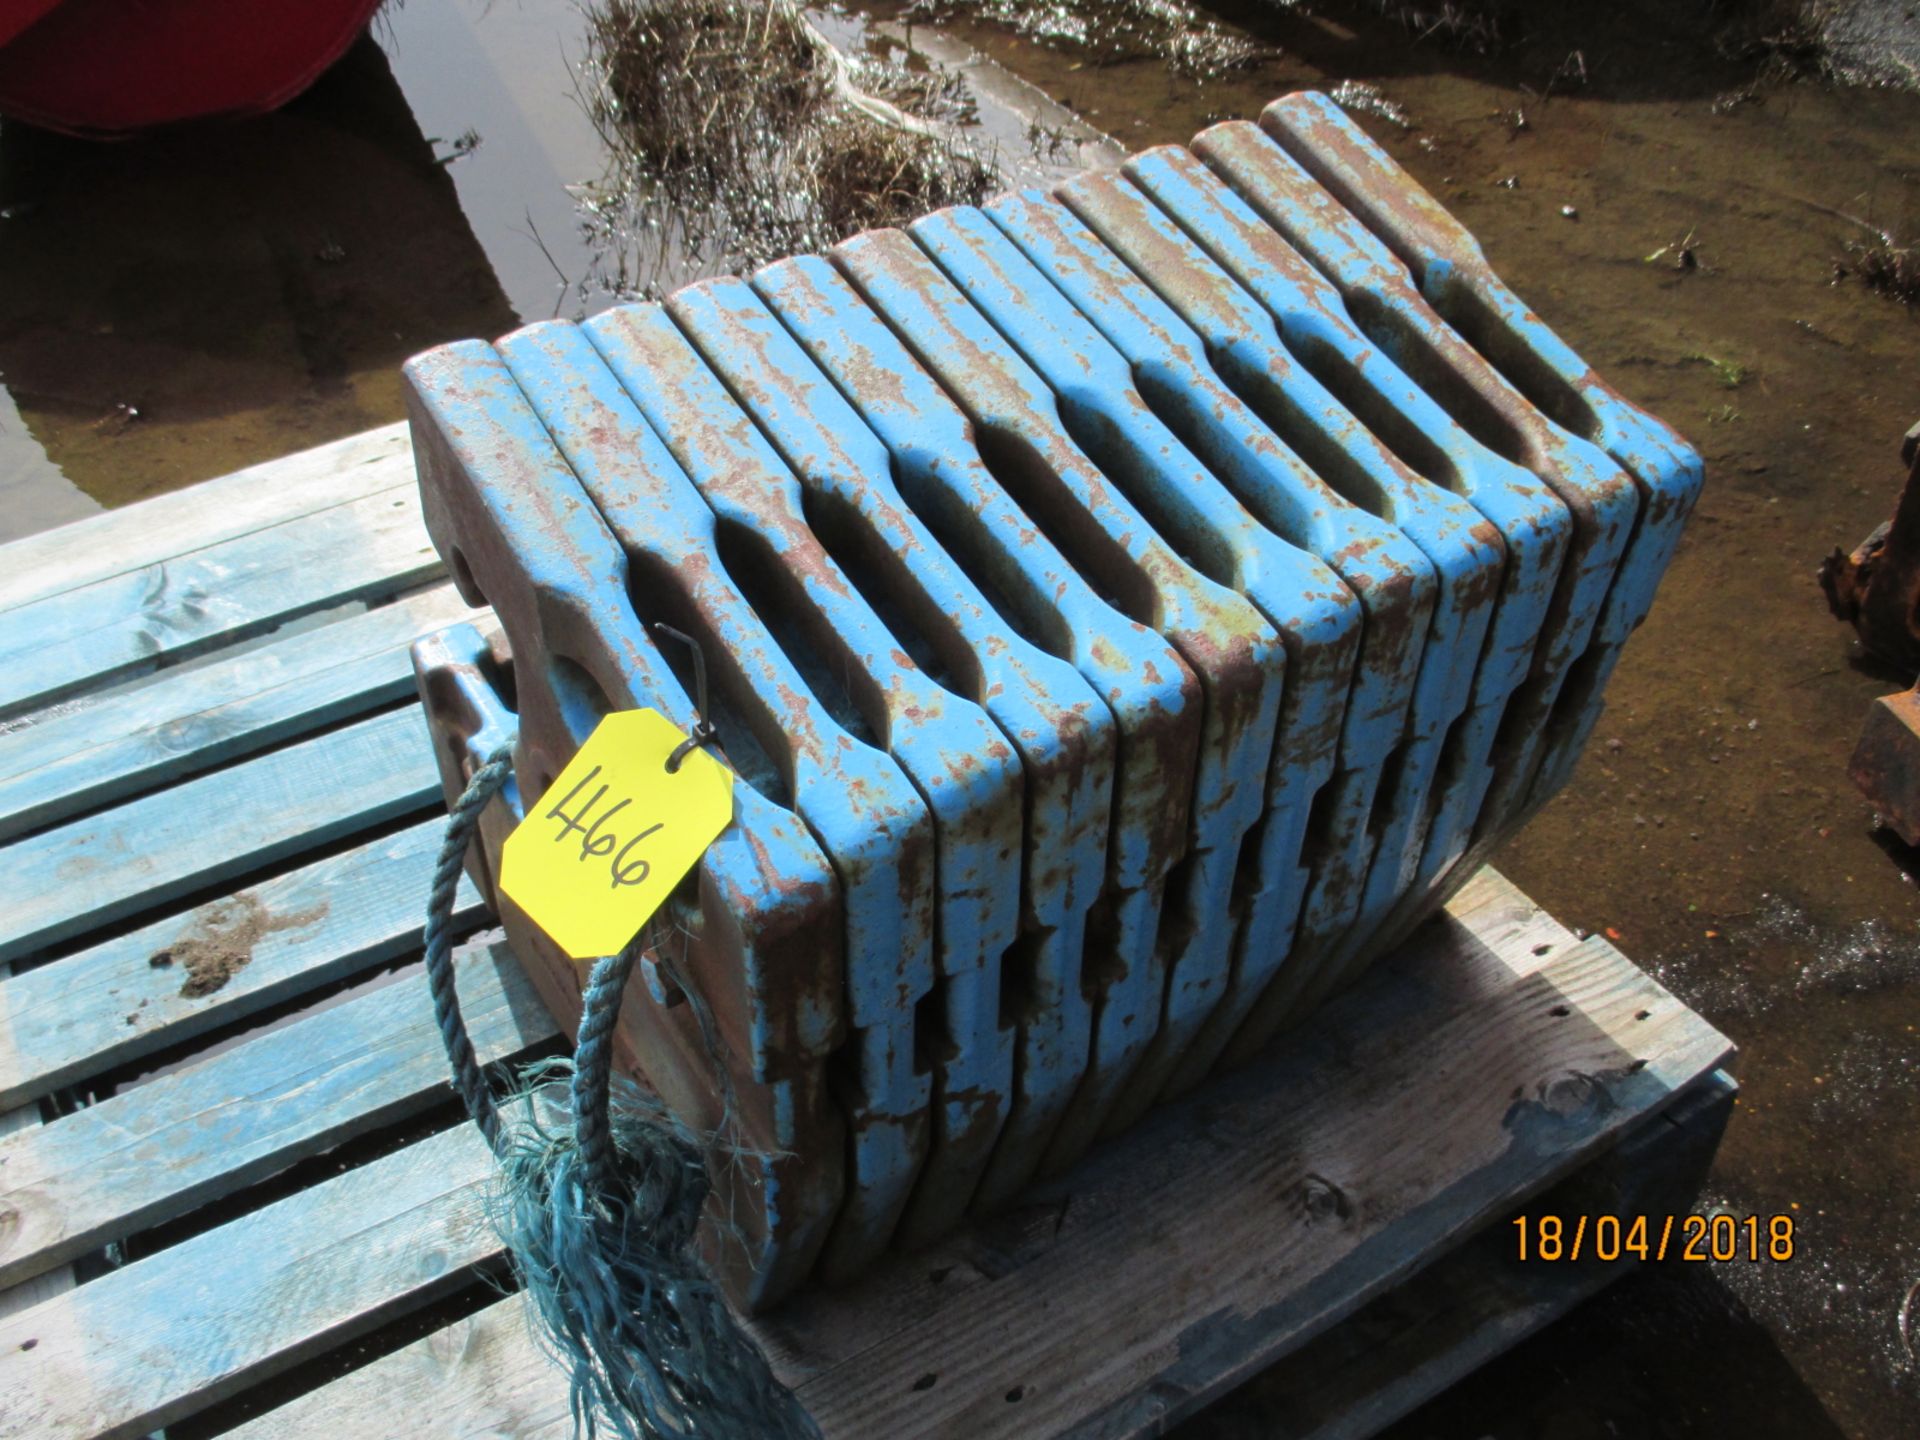 12 No. Ford Tractor Weights 12x40kg